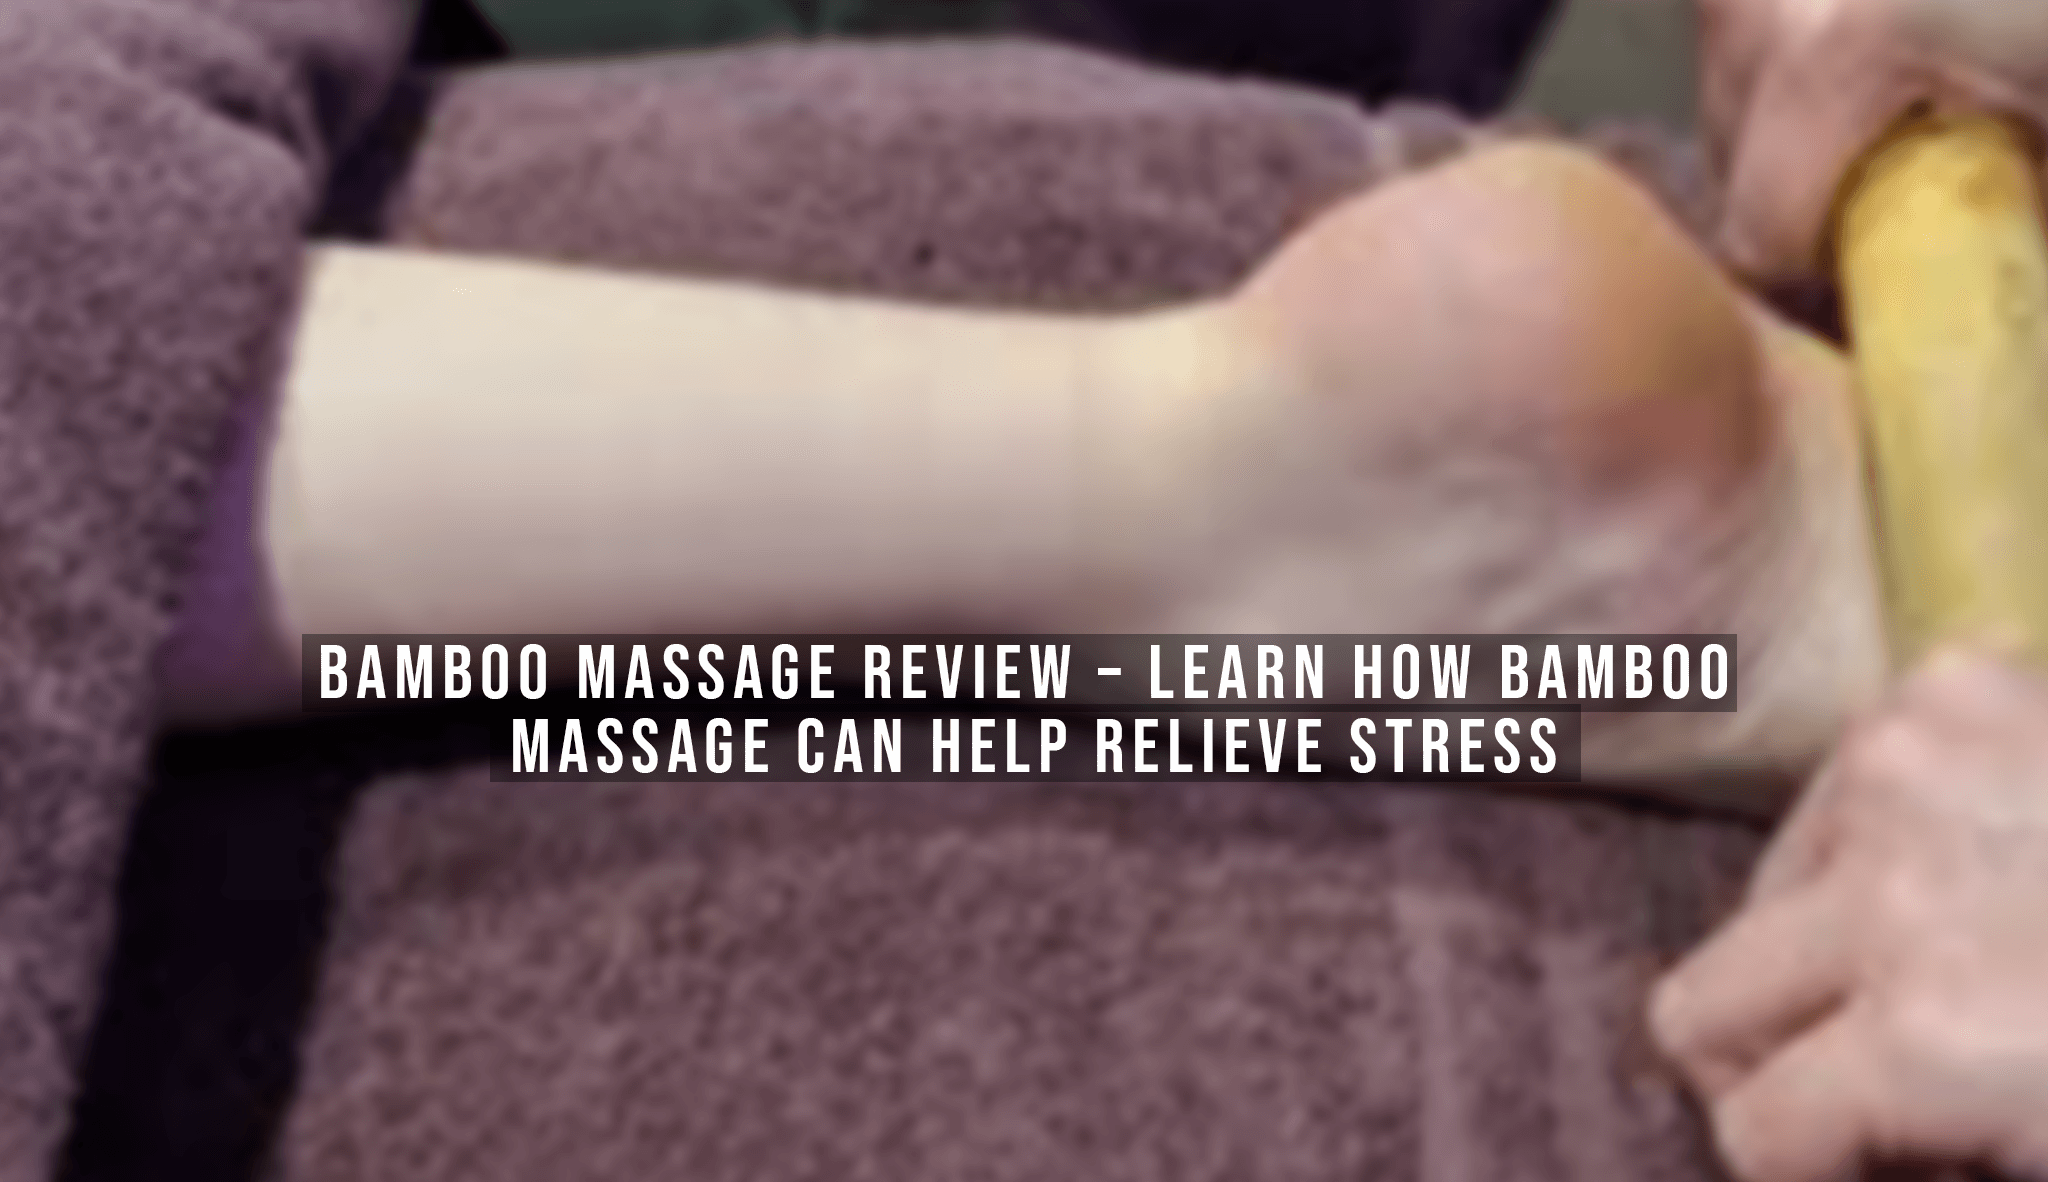 Bamboo Massage Review - Learn How Bamboo Massage Can Help Relieve Stress